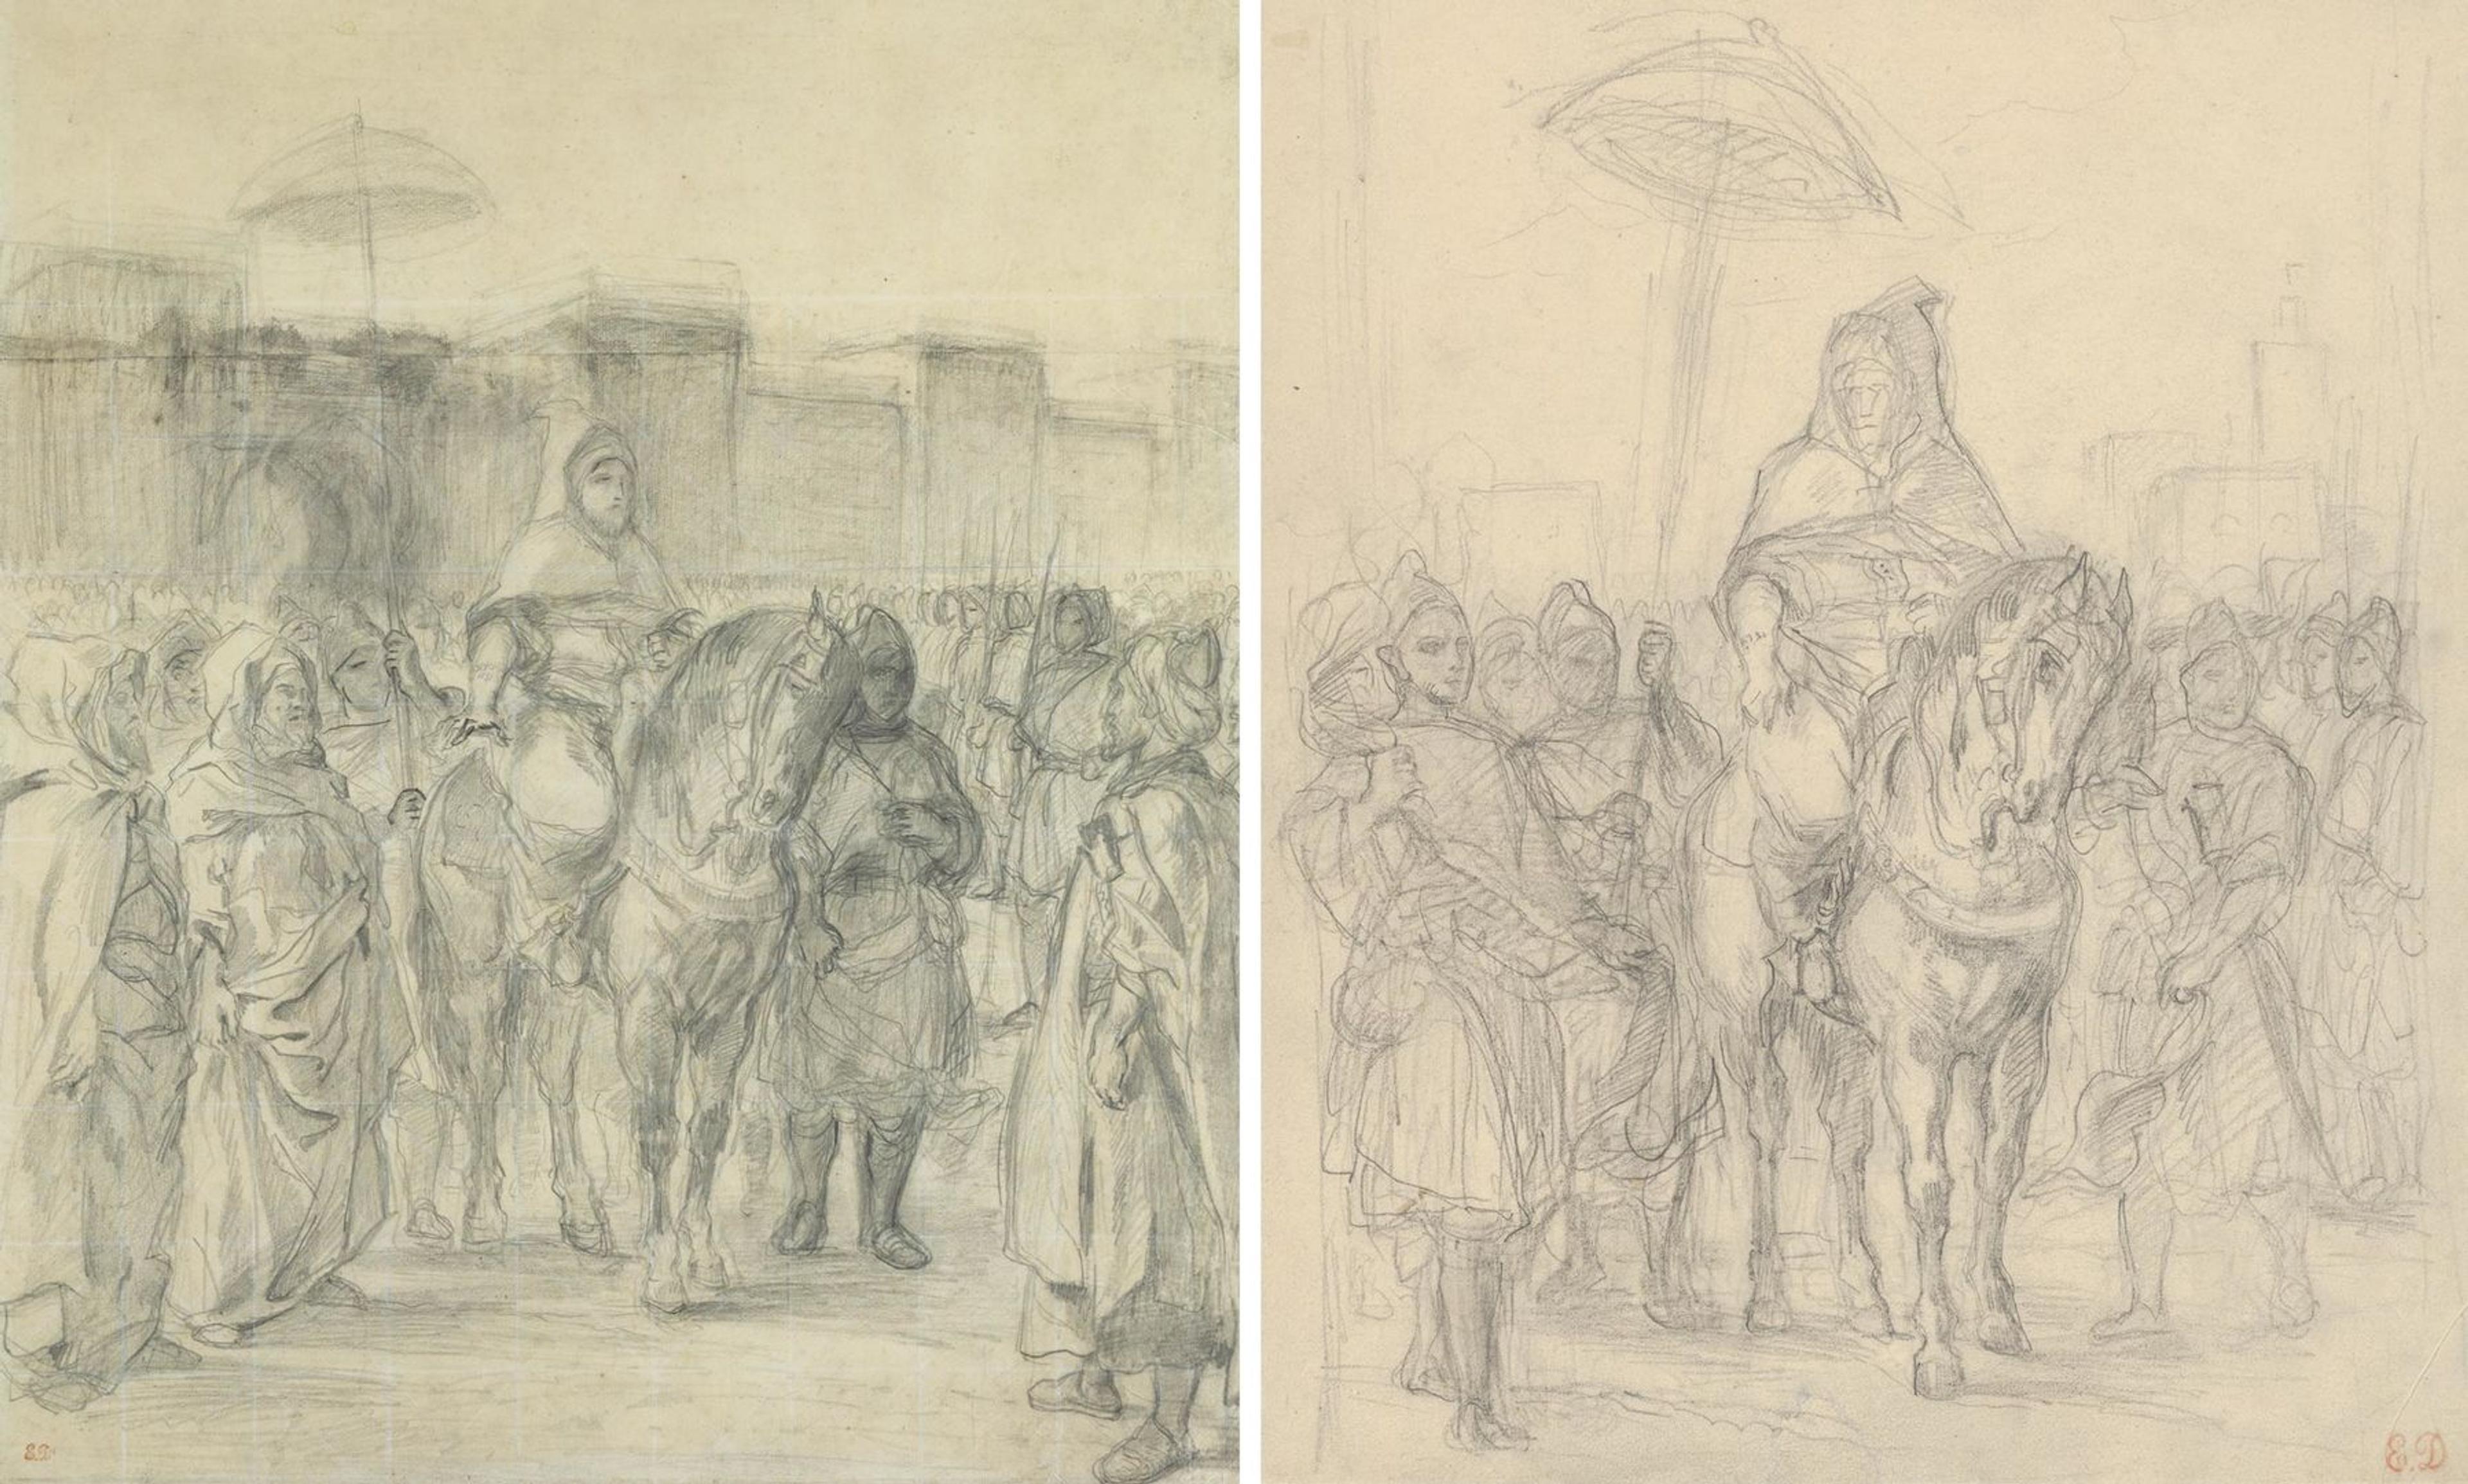 Two different drawings by Delacroix depicting a royal entourage from Morocco